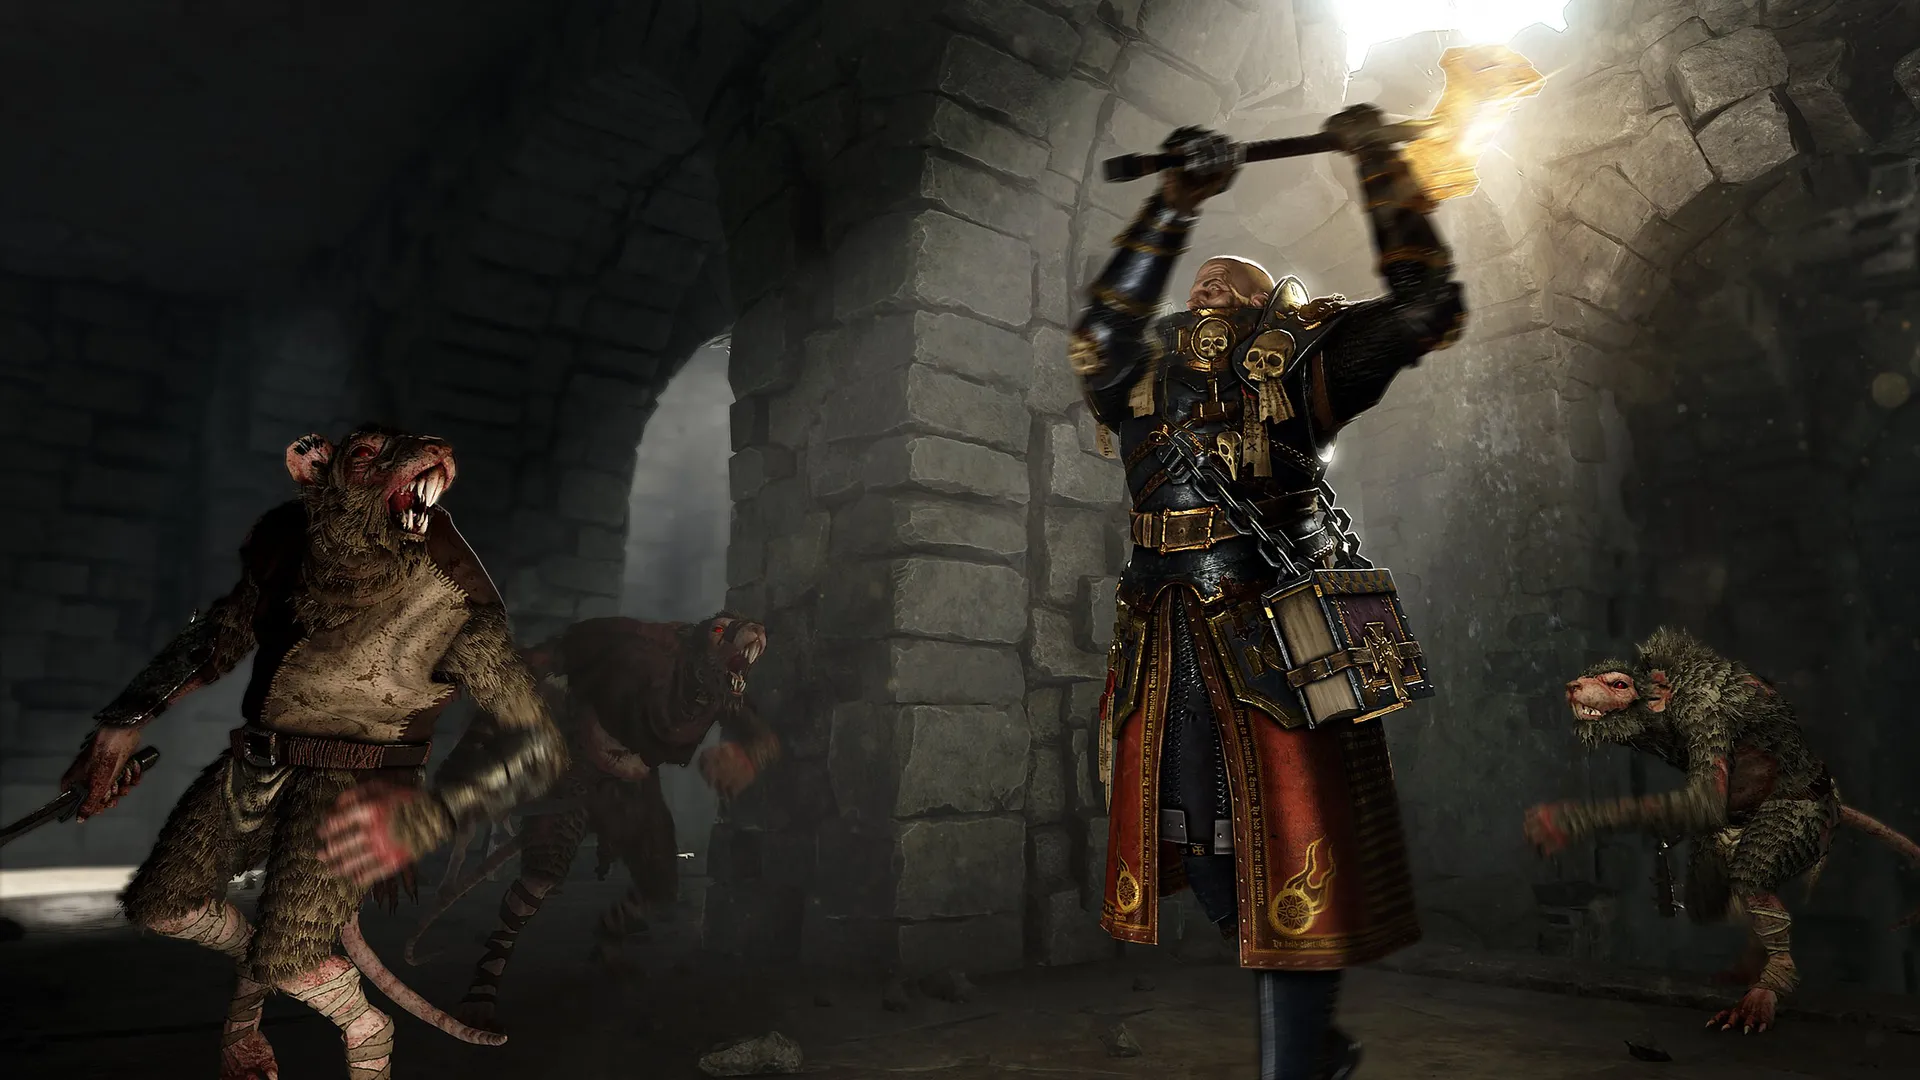 Warhammer: Vermintide 2 has risen from the shadow of Left 4 Dead four years later